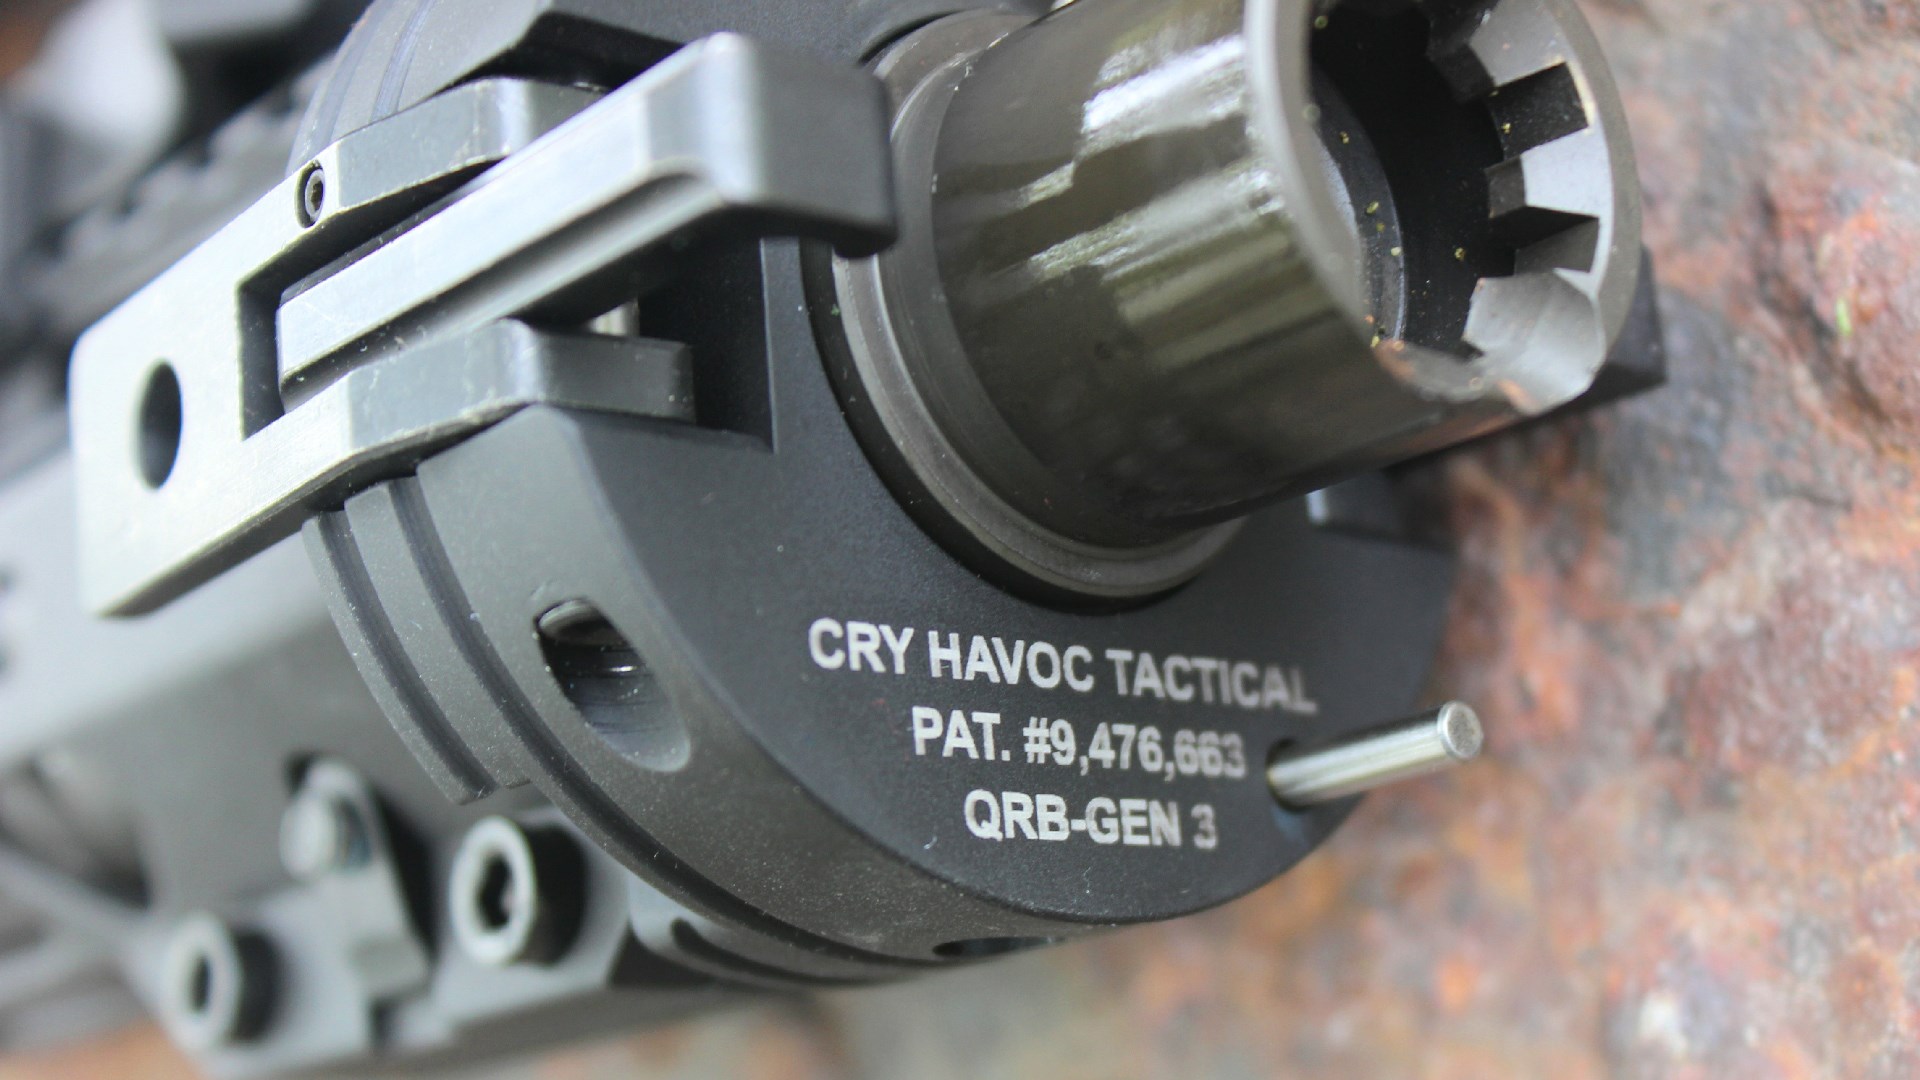 CRY HAVOC TACTICAL stamp text on metal part for takedown ar-15 ar-10 QRB-GEN 3